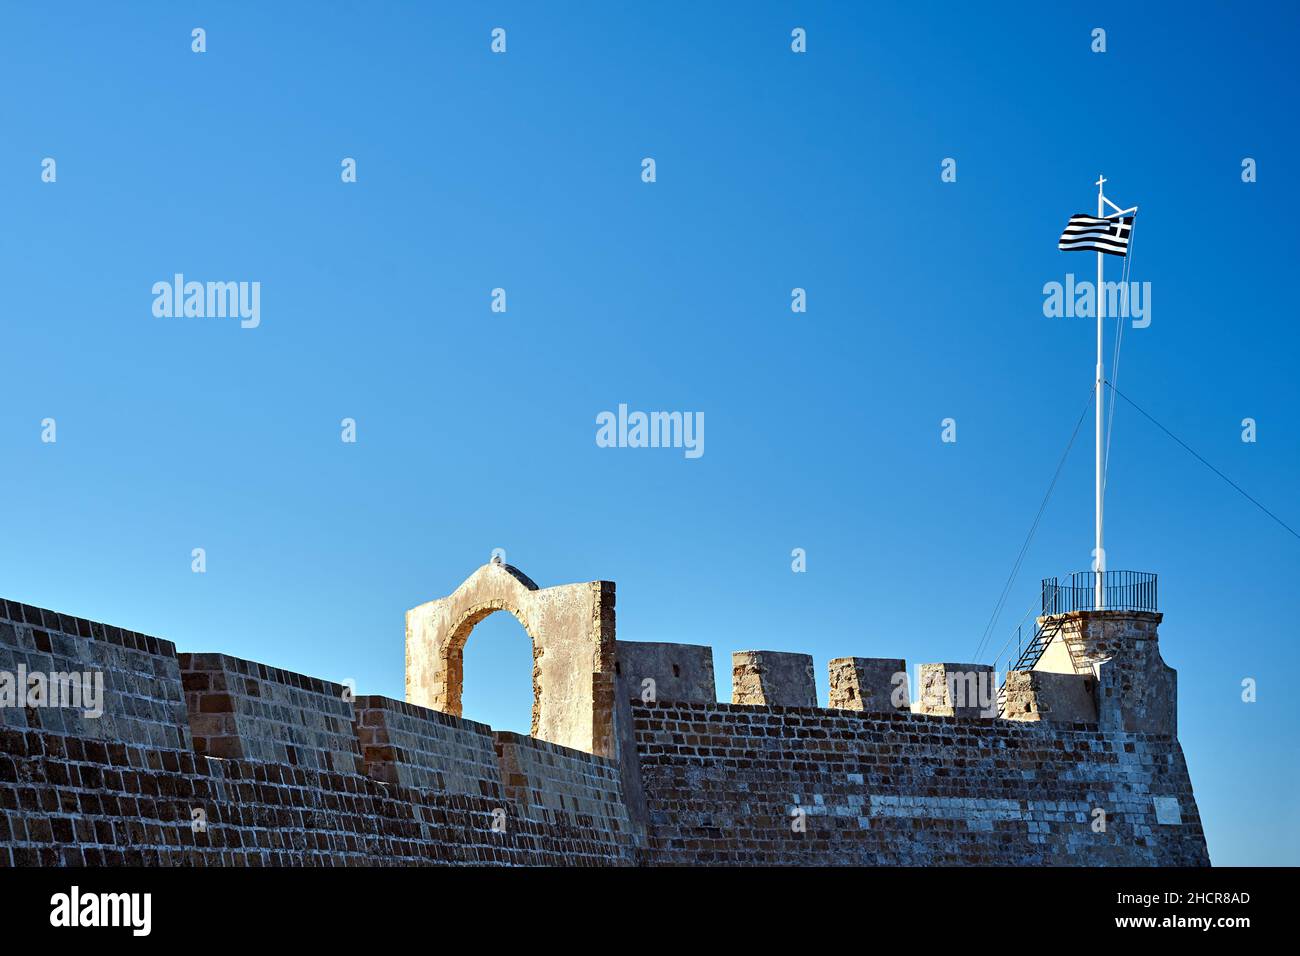 A bastion of a Venetian fortress with a Greek flag on a mast in the city of Chania on the island of Crete in Greece Stock Photo